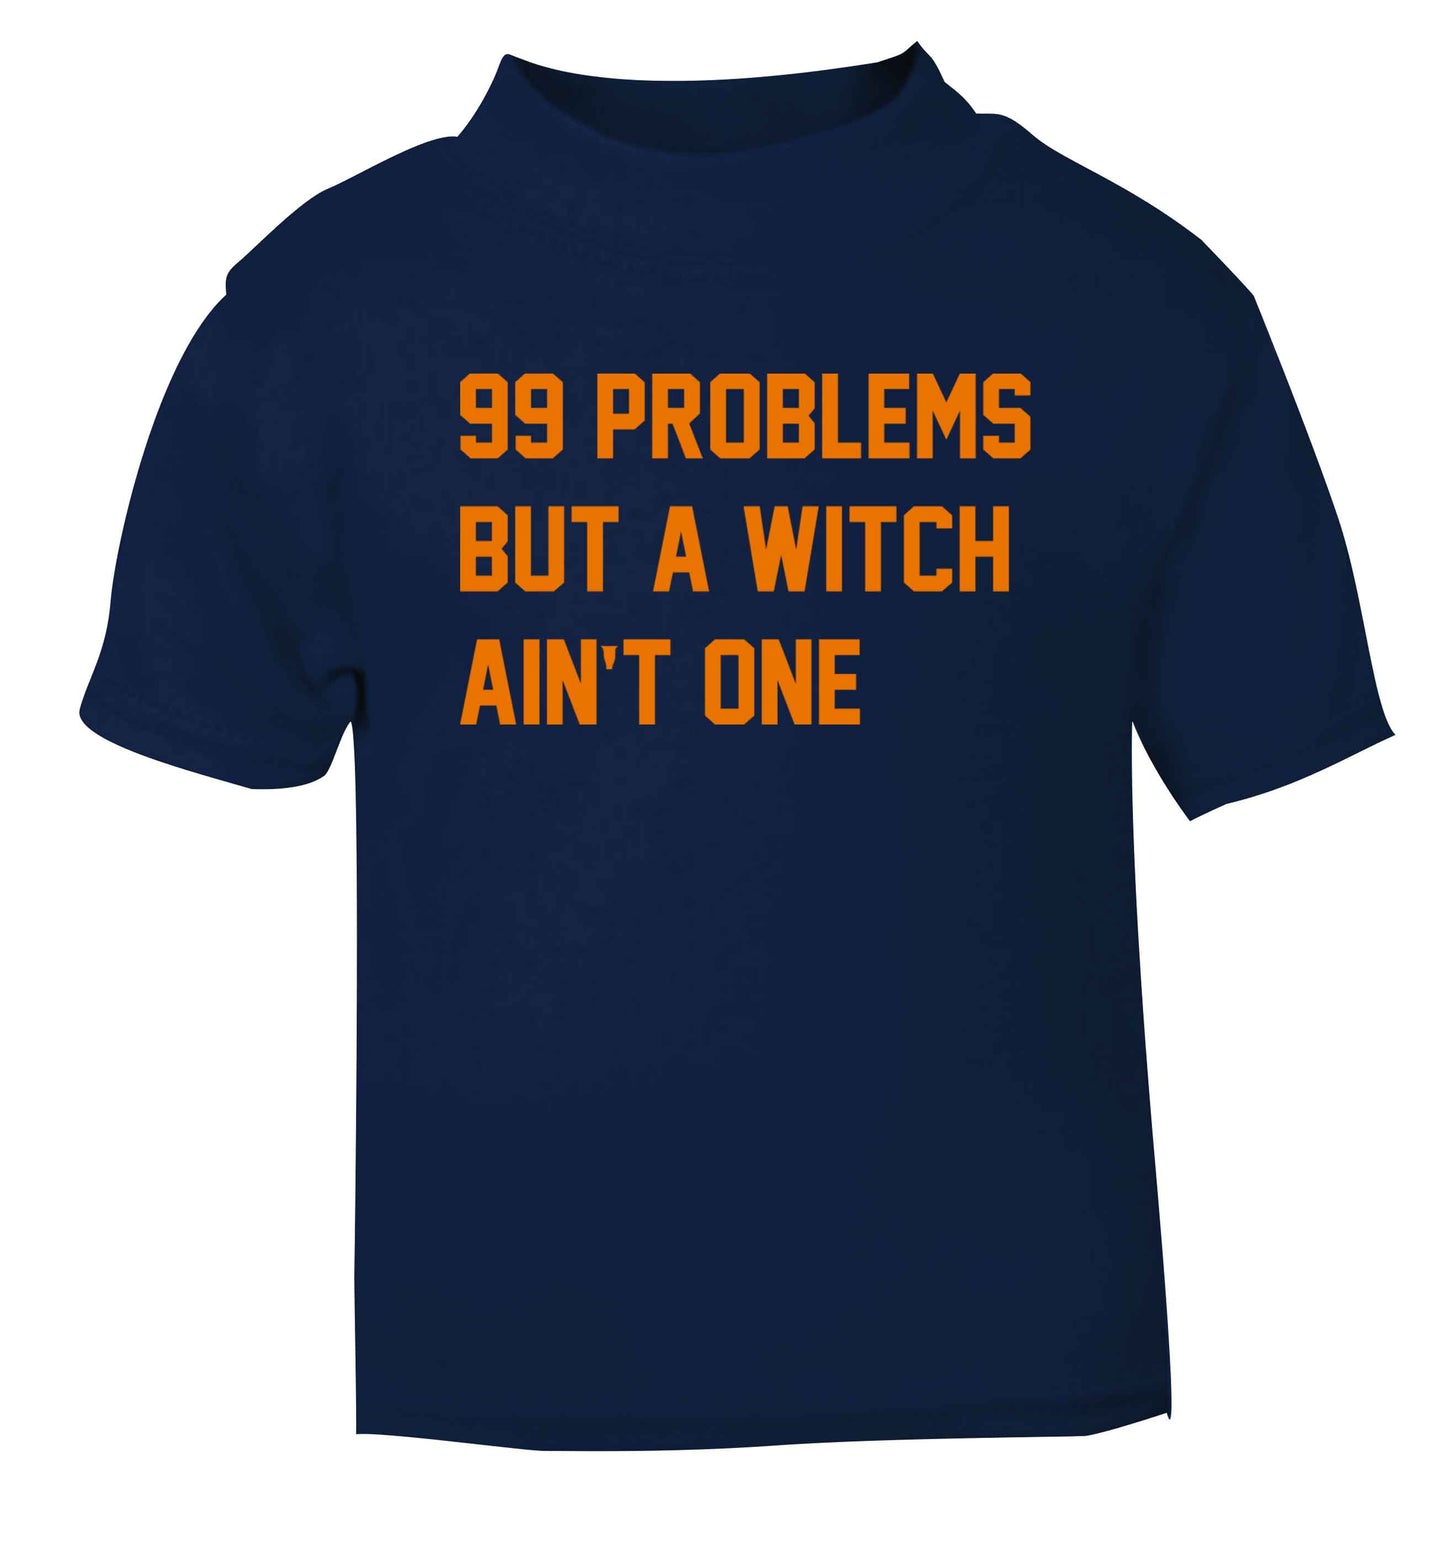 99 Problems but a witch aint one navy baby toddler Tshirt 2 Years